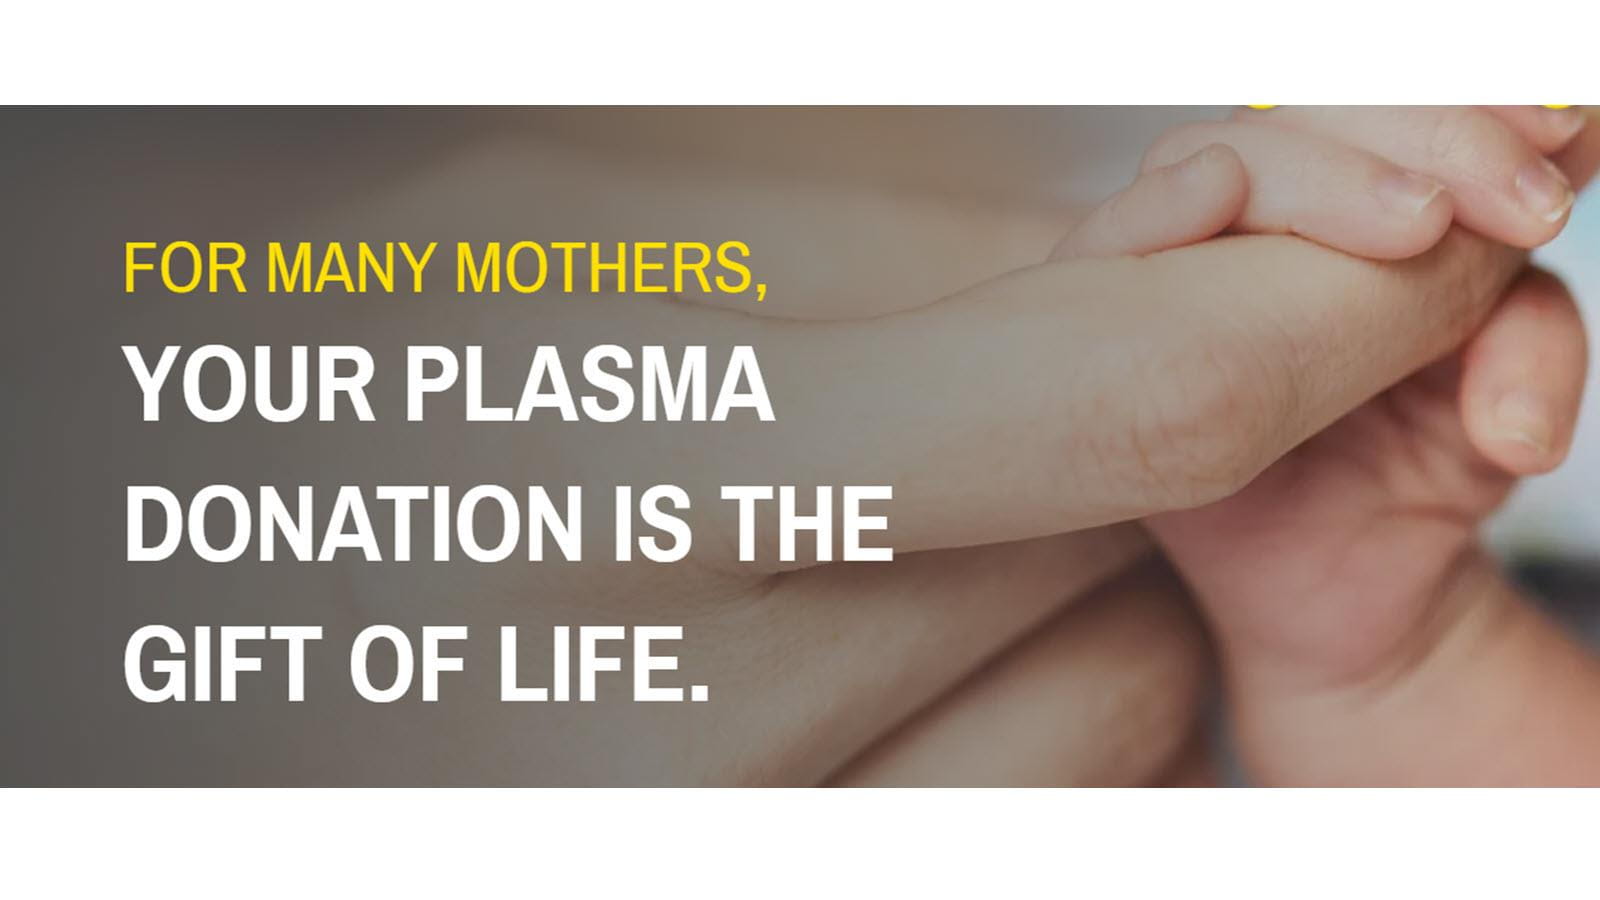 For many moms, your plasma donation is the gift of life